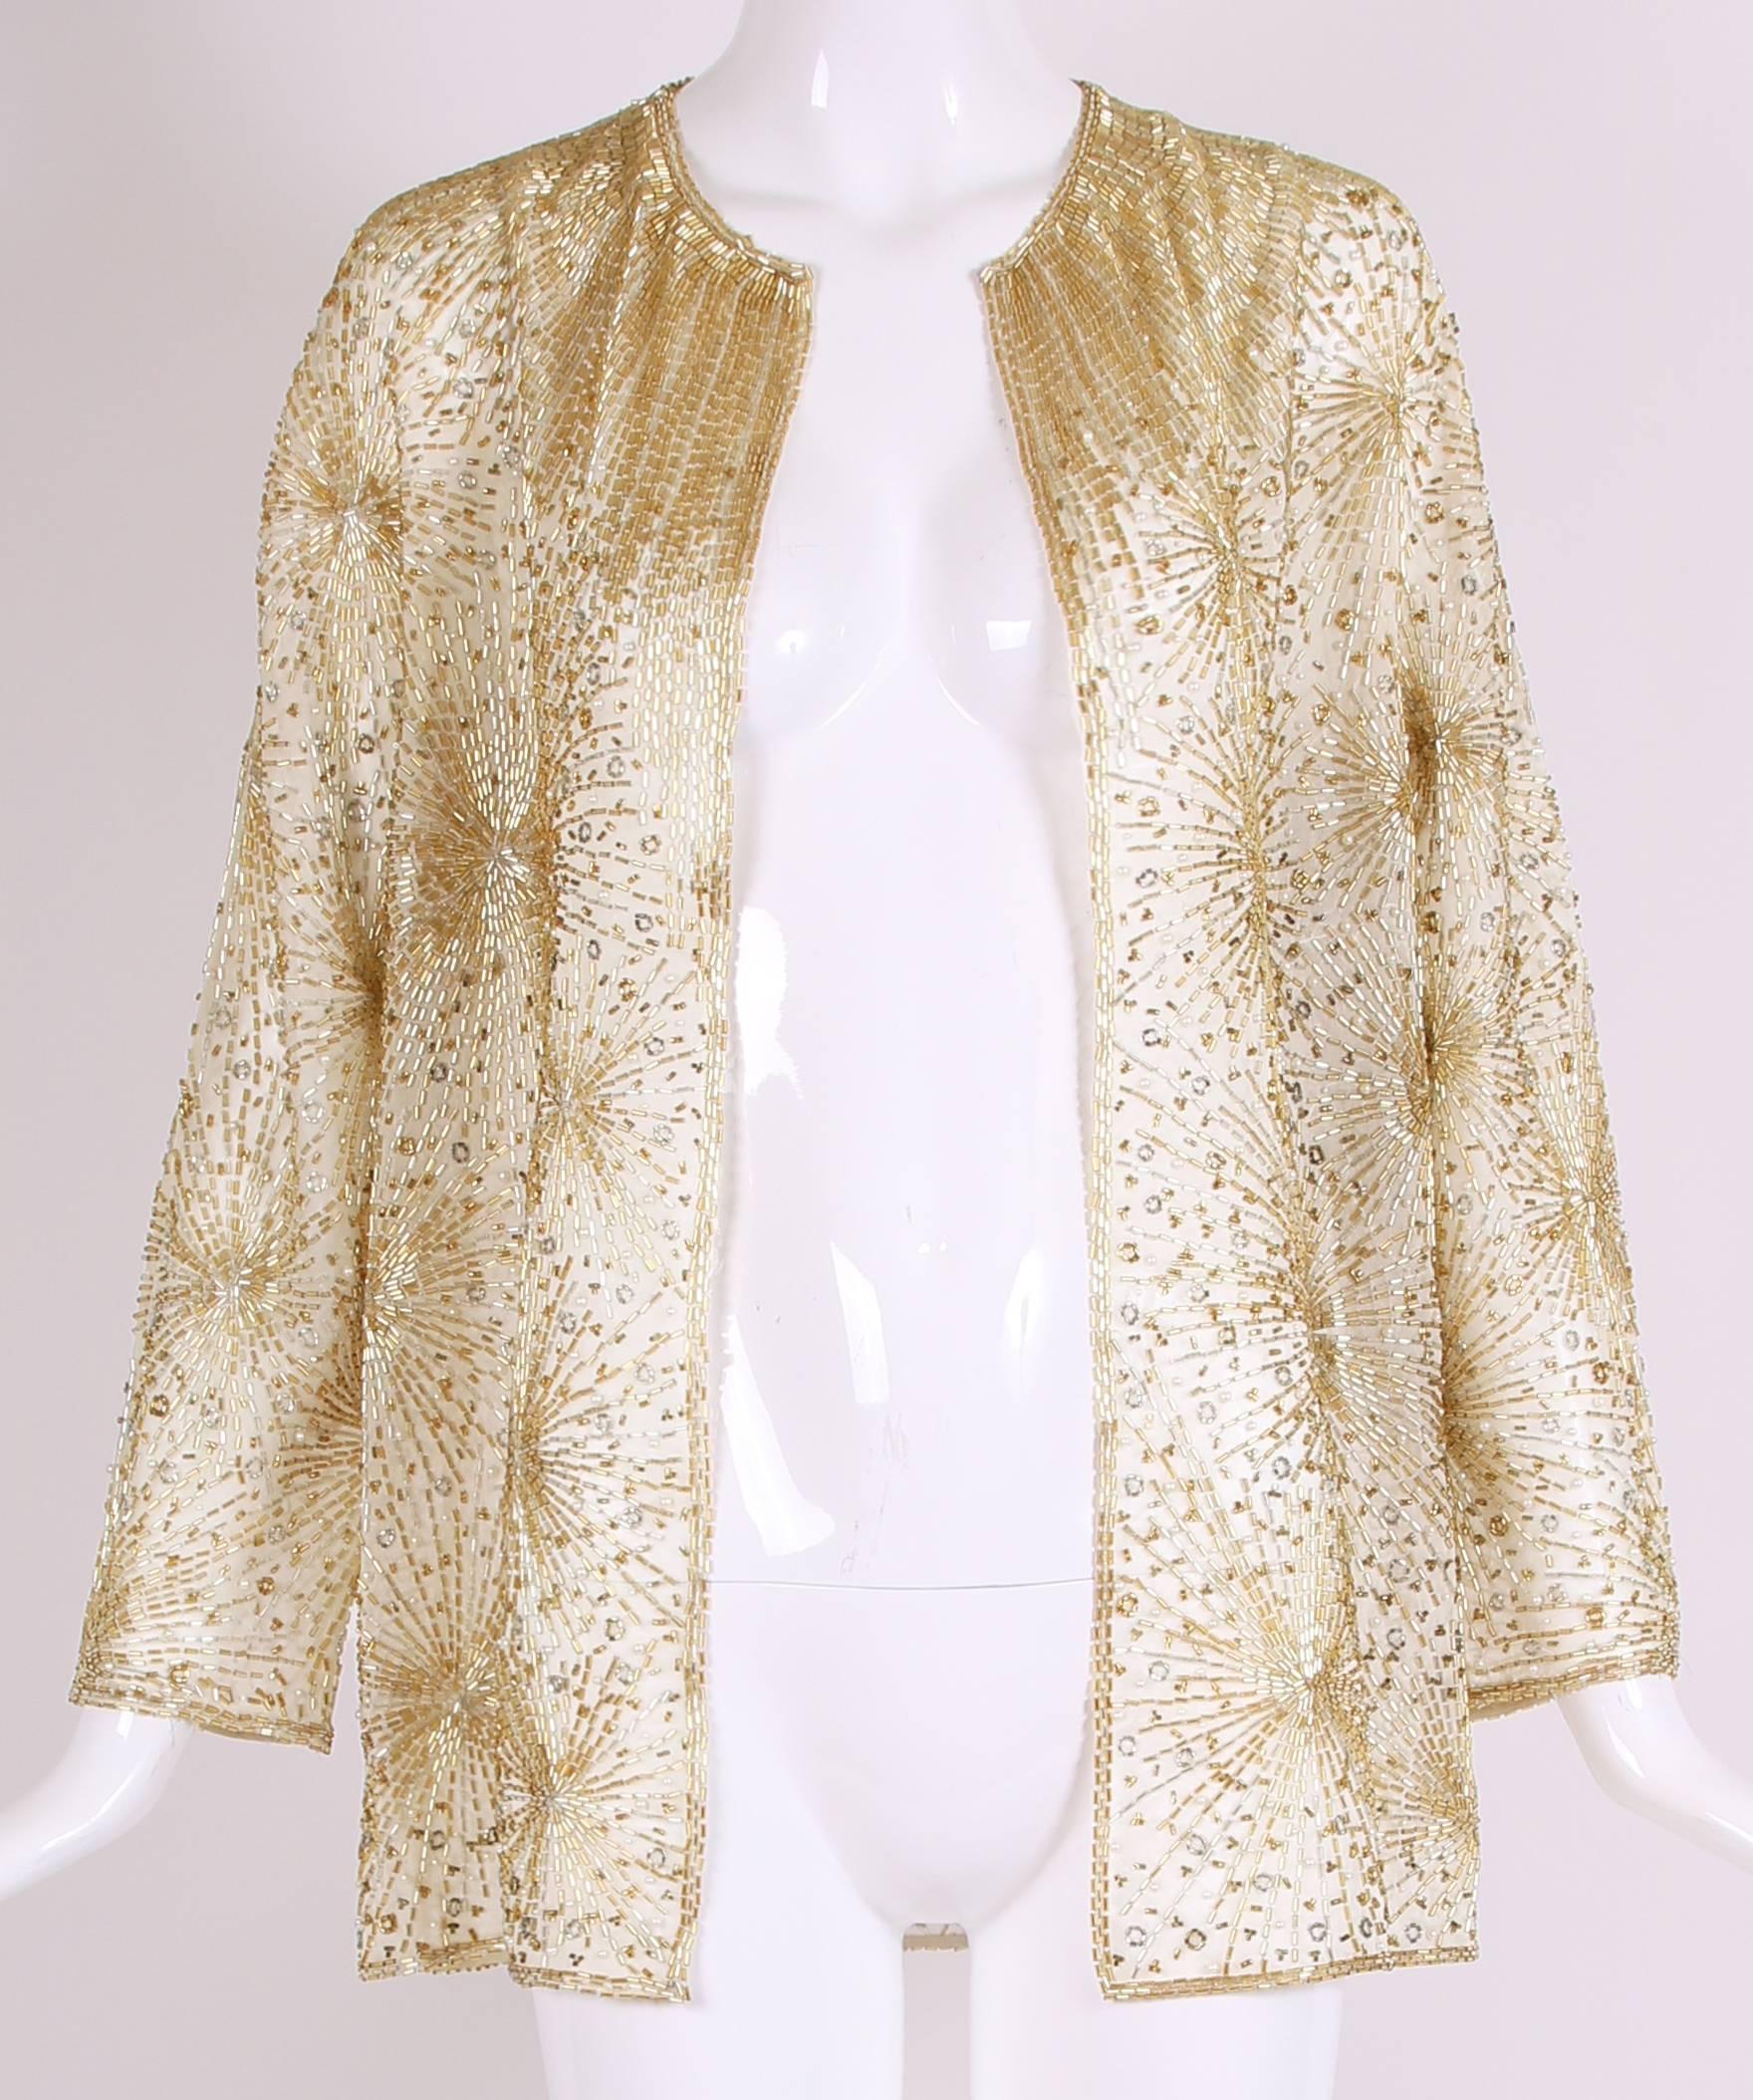 1981 Halston gold and silver bugle beaded with pearls open front jacket featuring the 